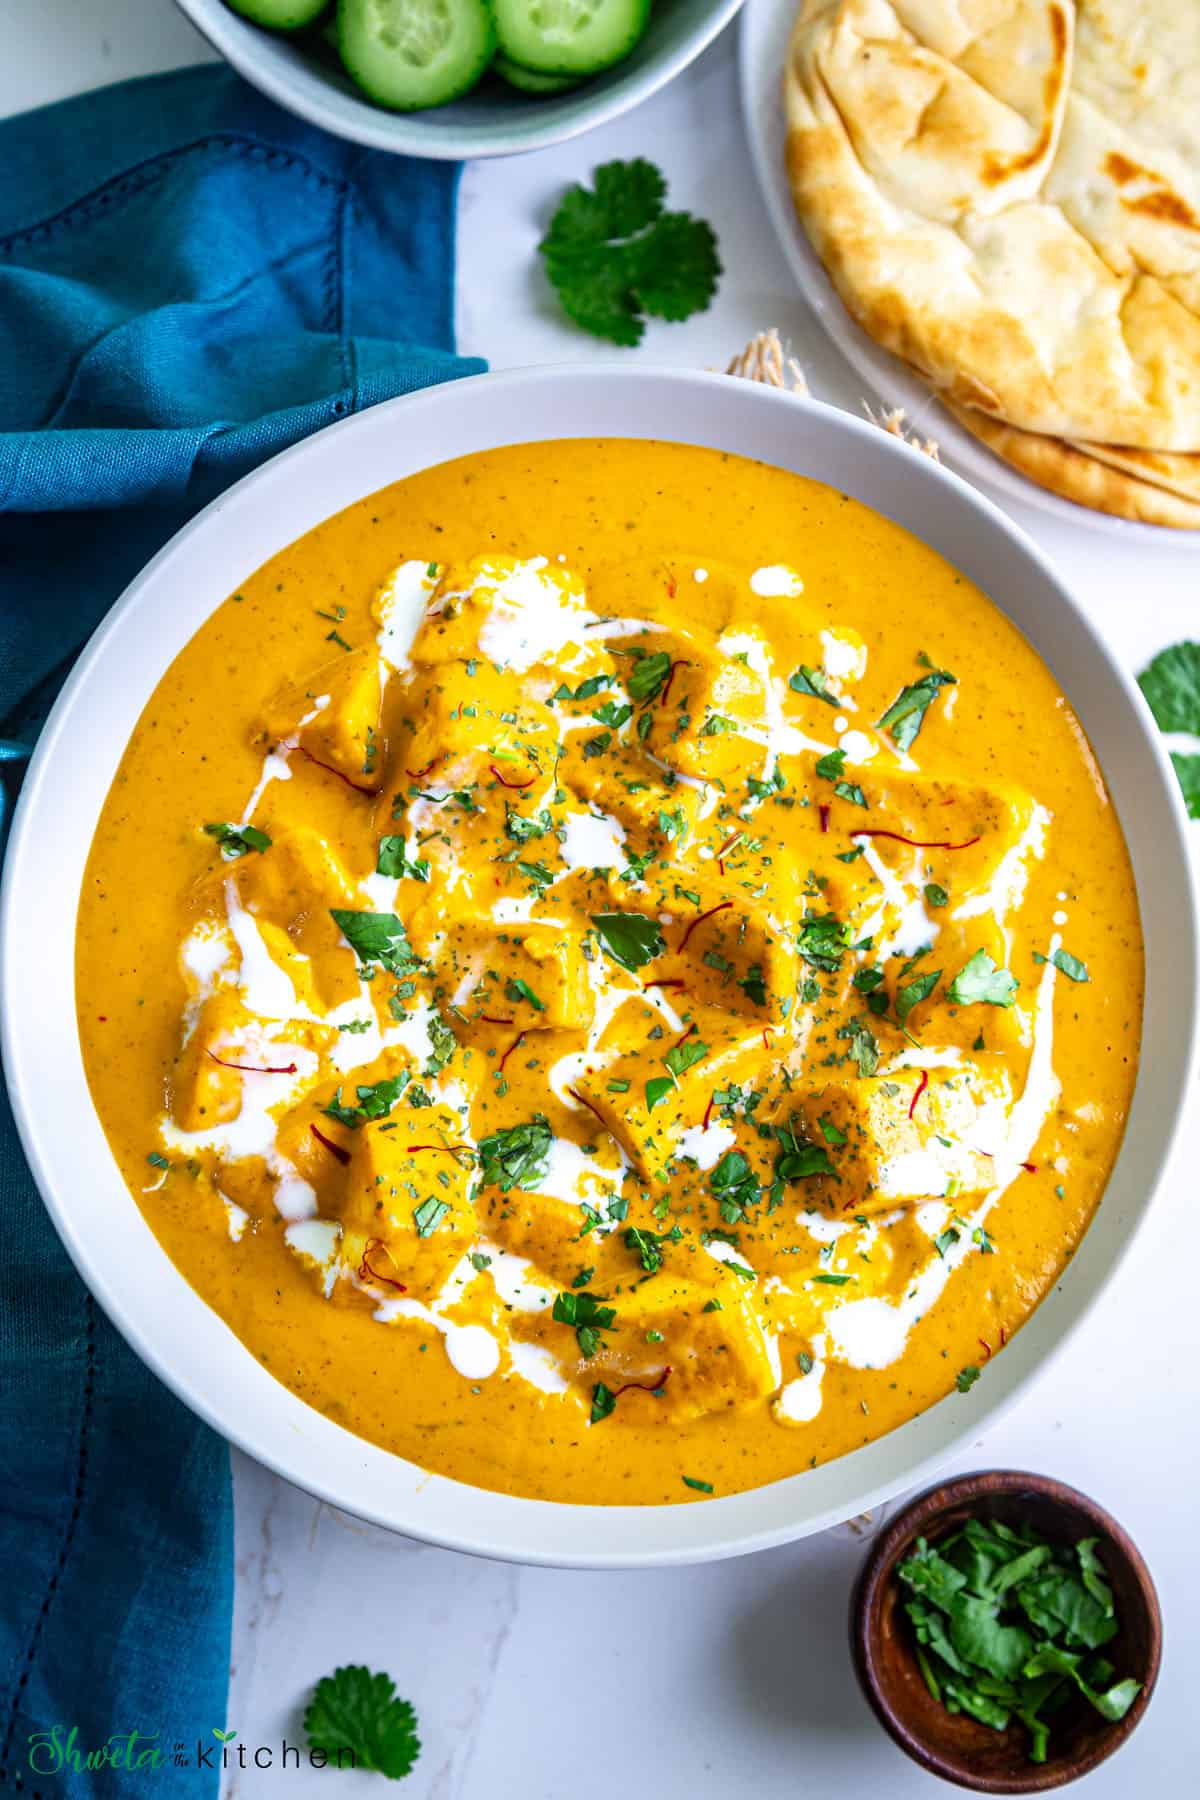 Top view of bowl of shahi paneer garnished with cilantro, saffron and cream 